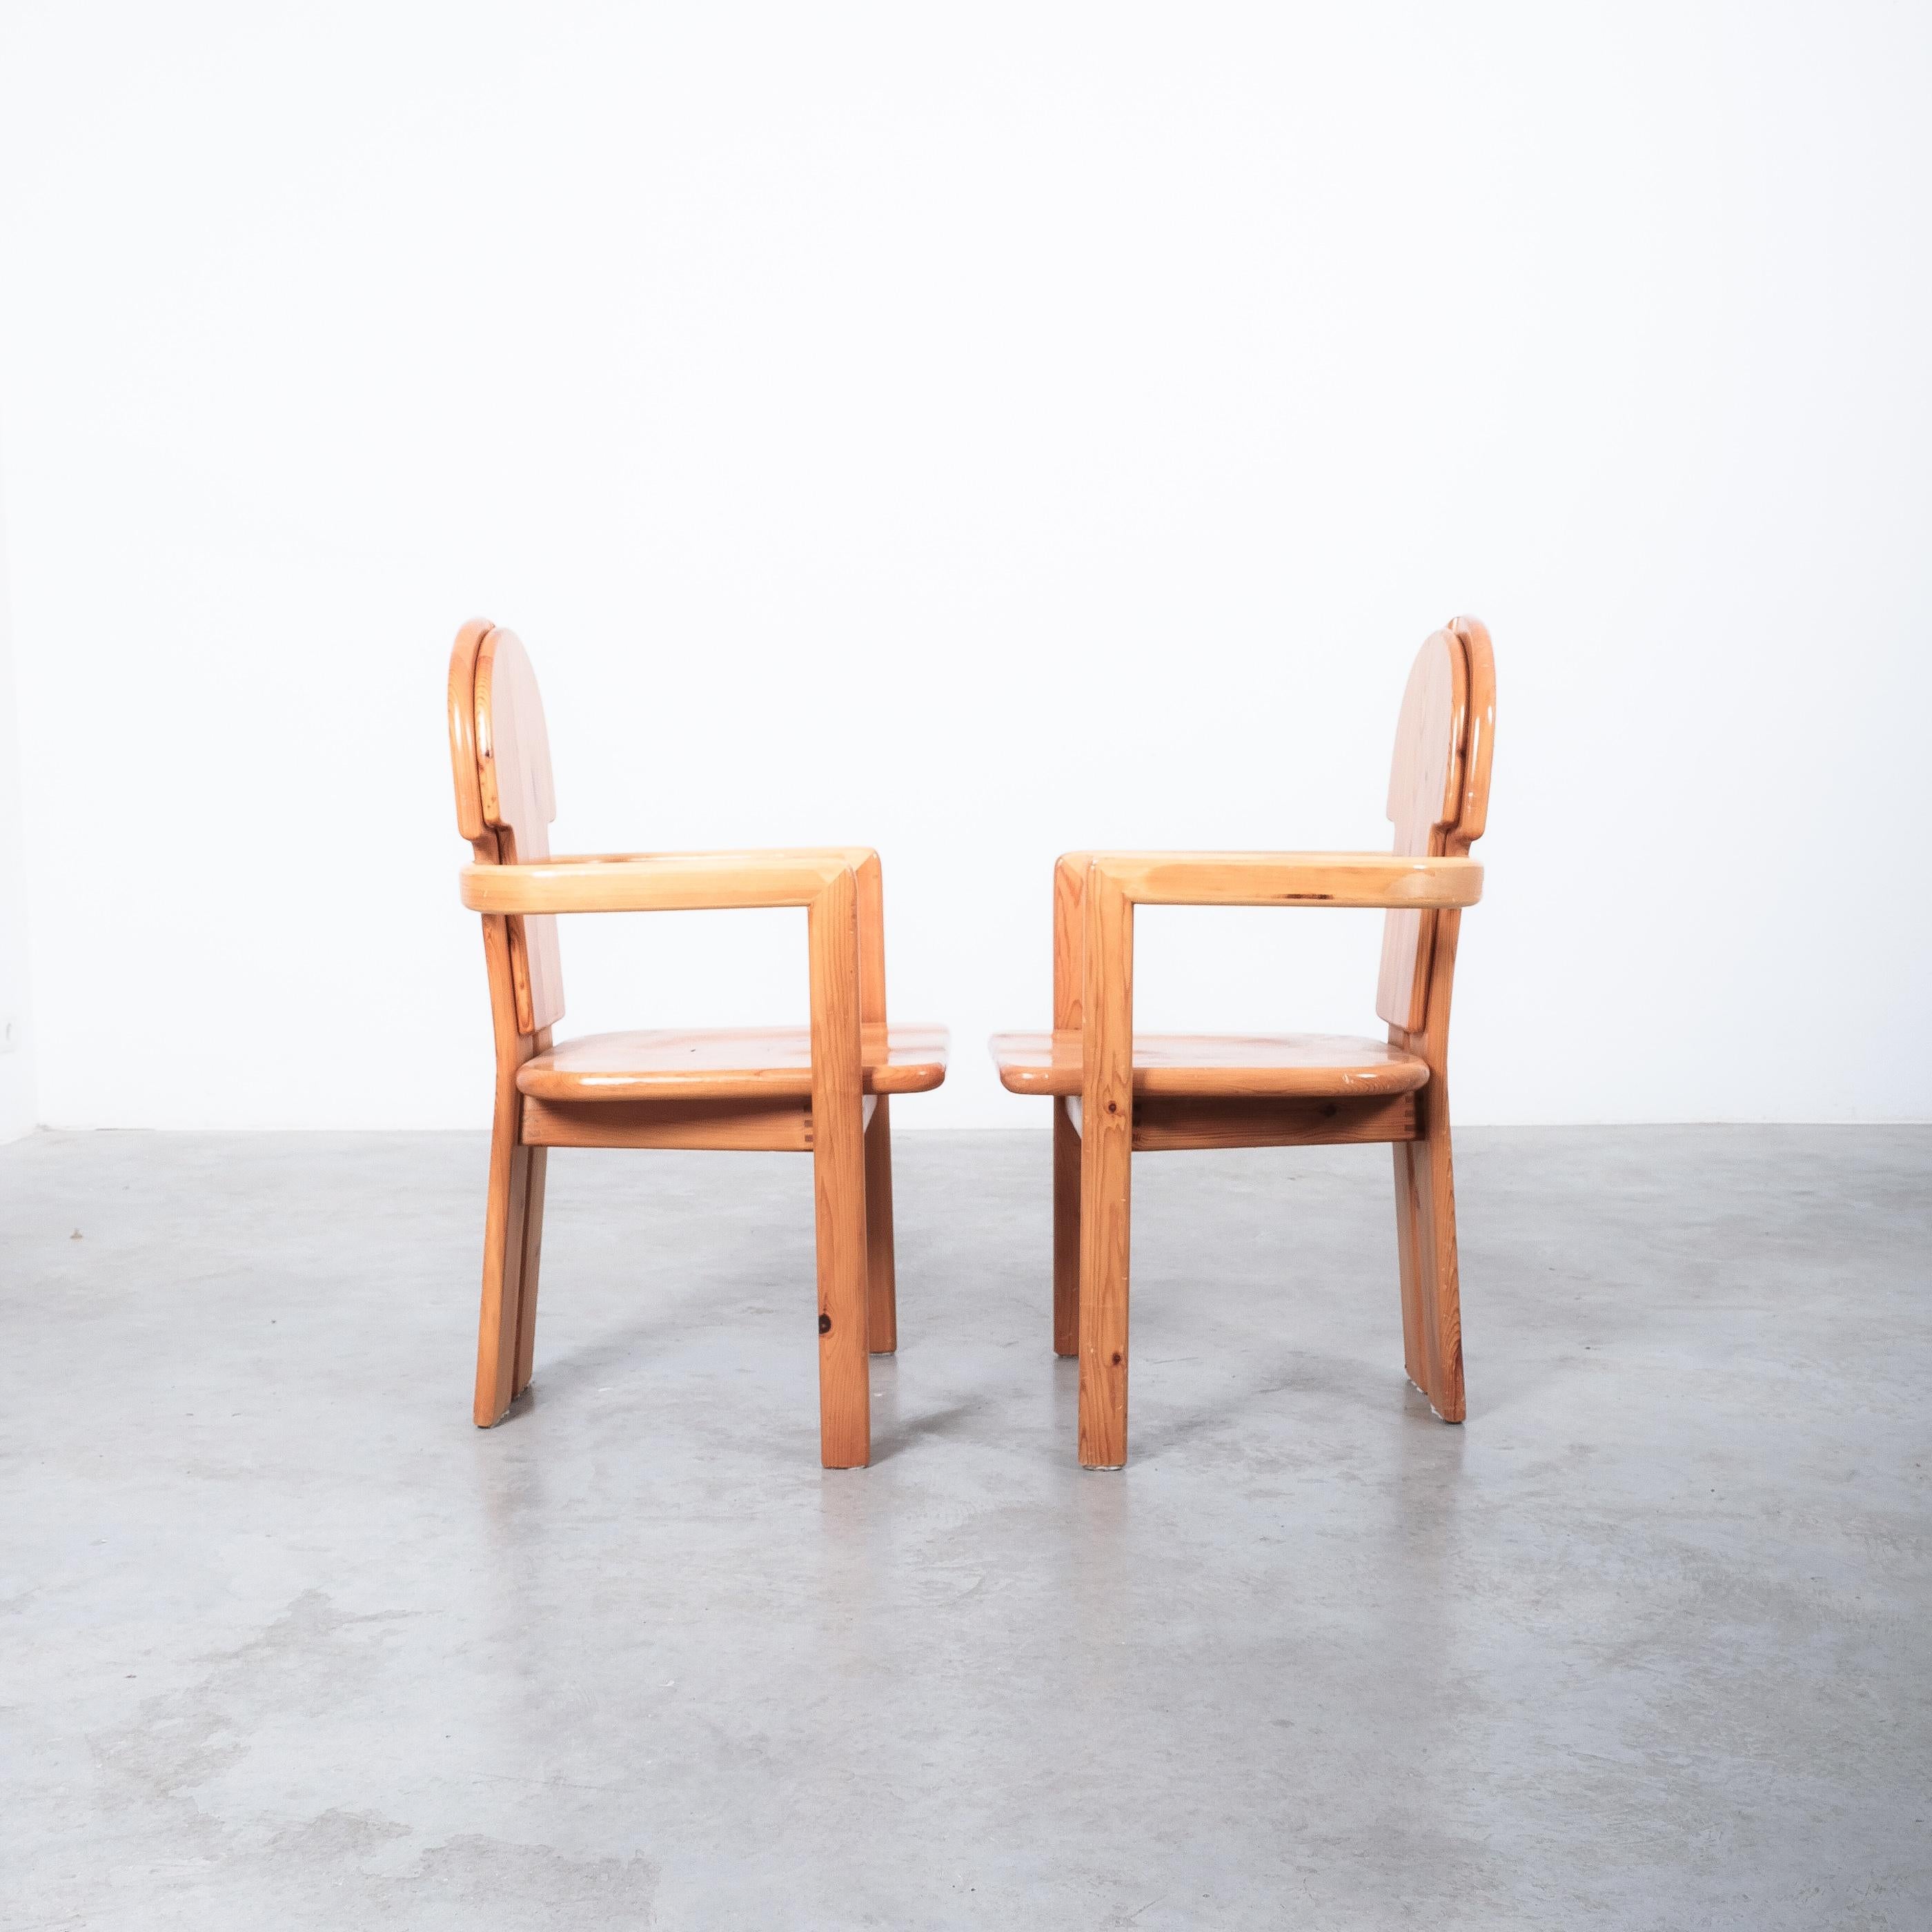 Rainer Daumiller Solid Pine Wood Dining Chairs '6' Danish Design, 1970 For Sale 14